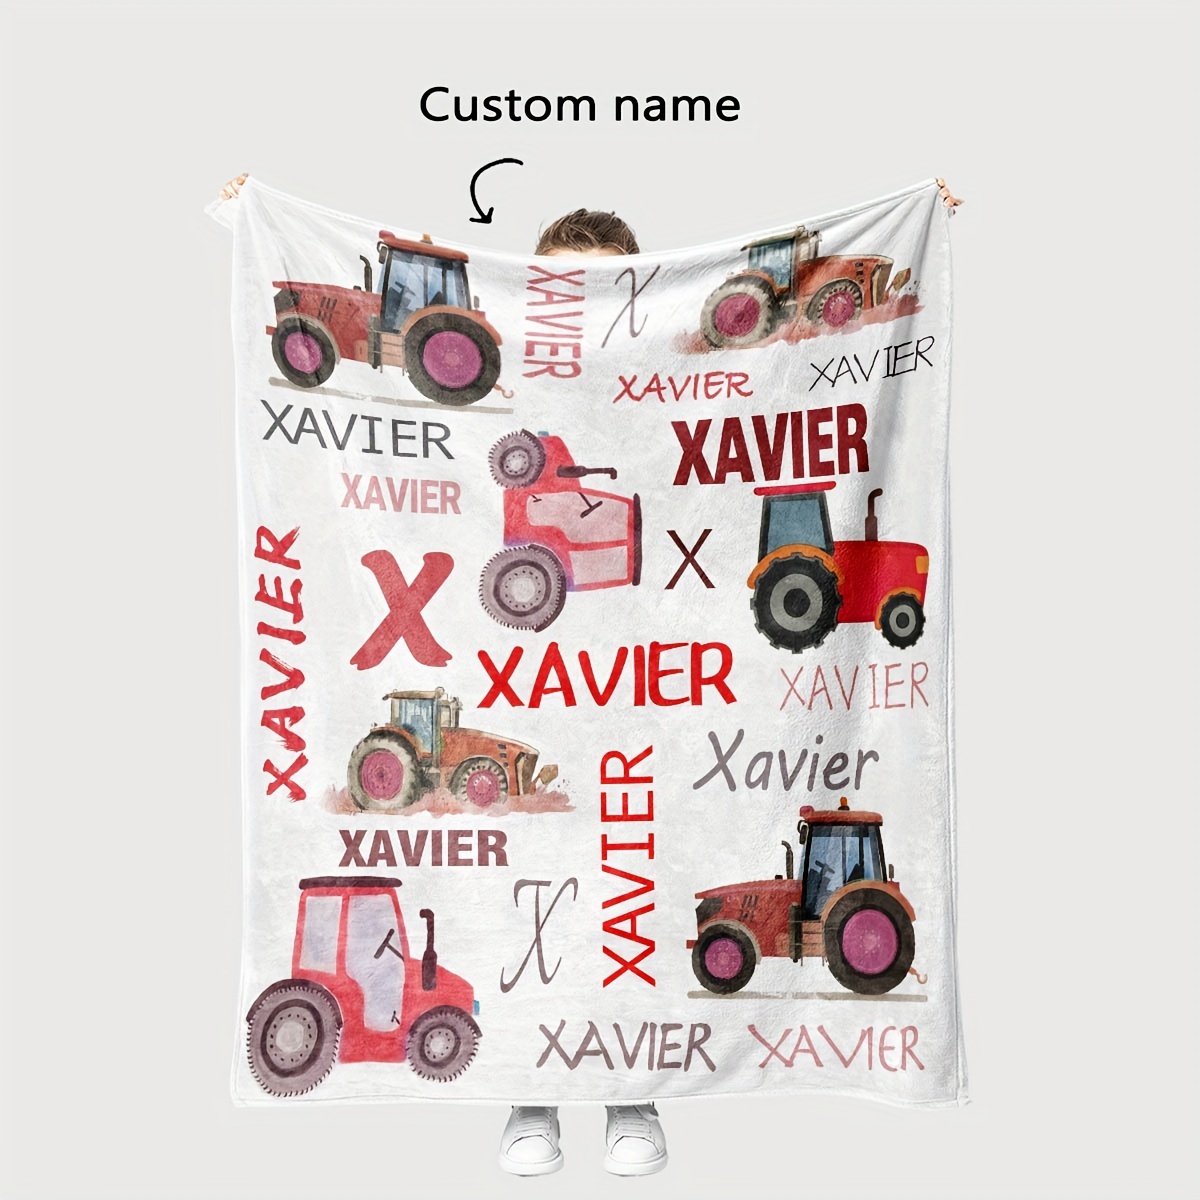 

1pc Digital Print Name Custom Blanket Tractor Element Flannel Blanket - Soft, Lightweight - Perfect For Travel, Home Decor And Gift Blankets